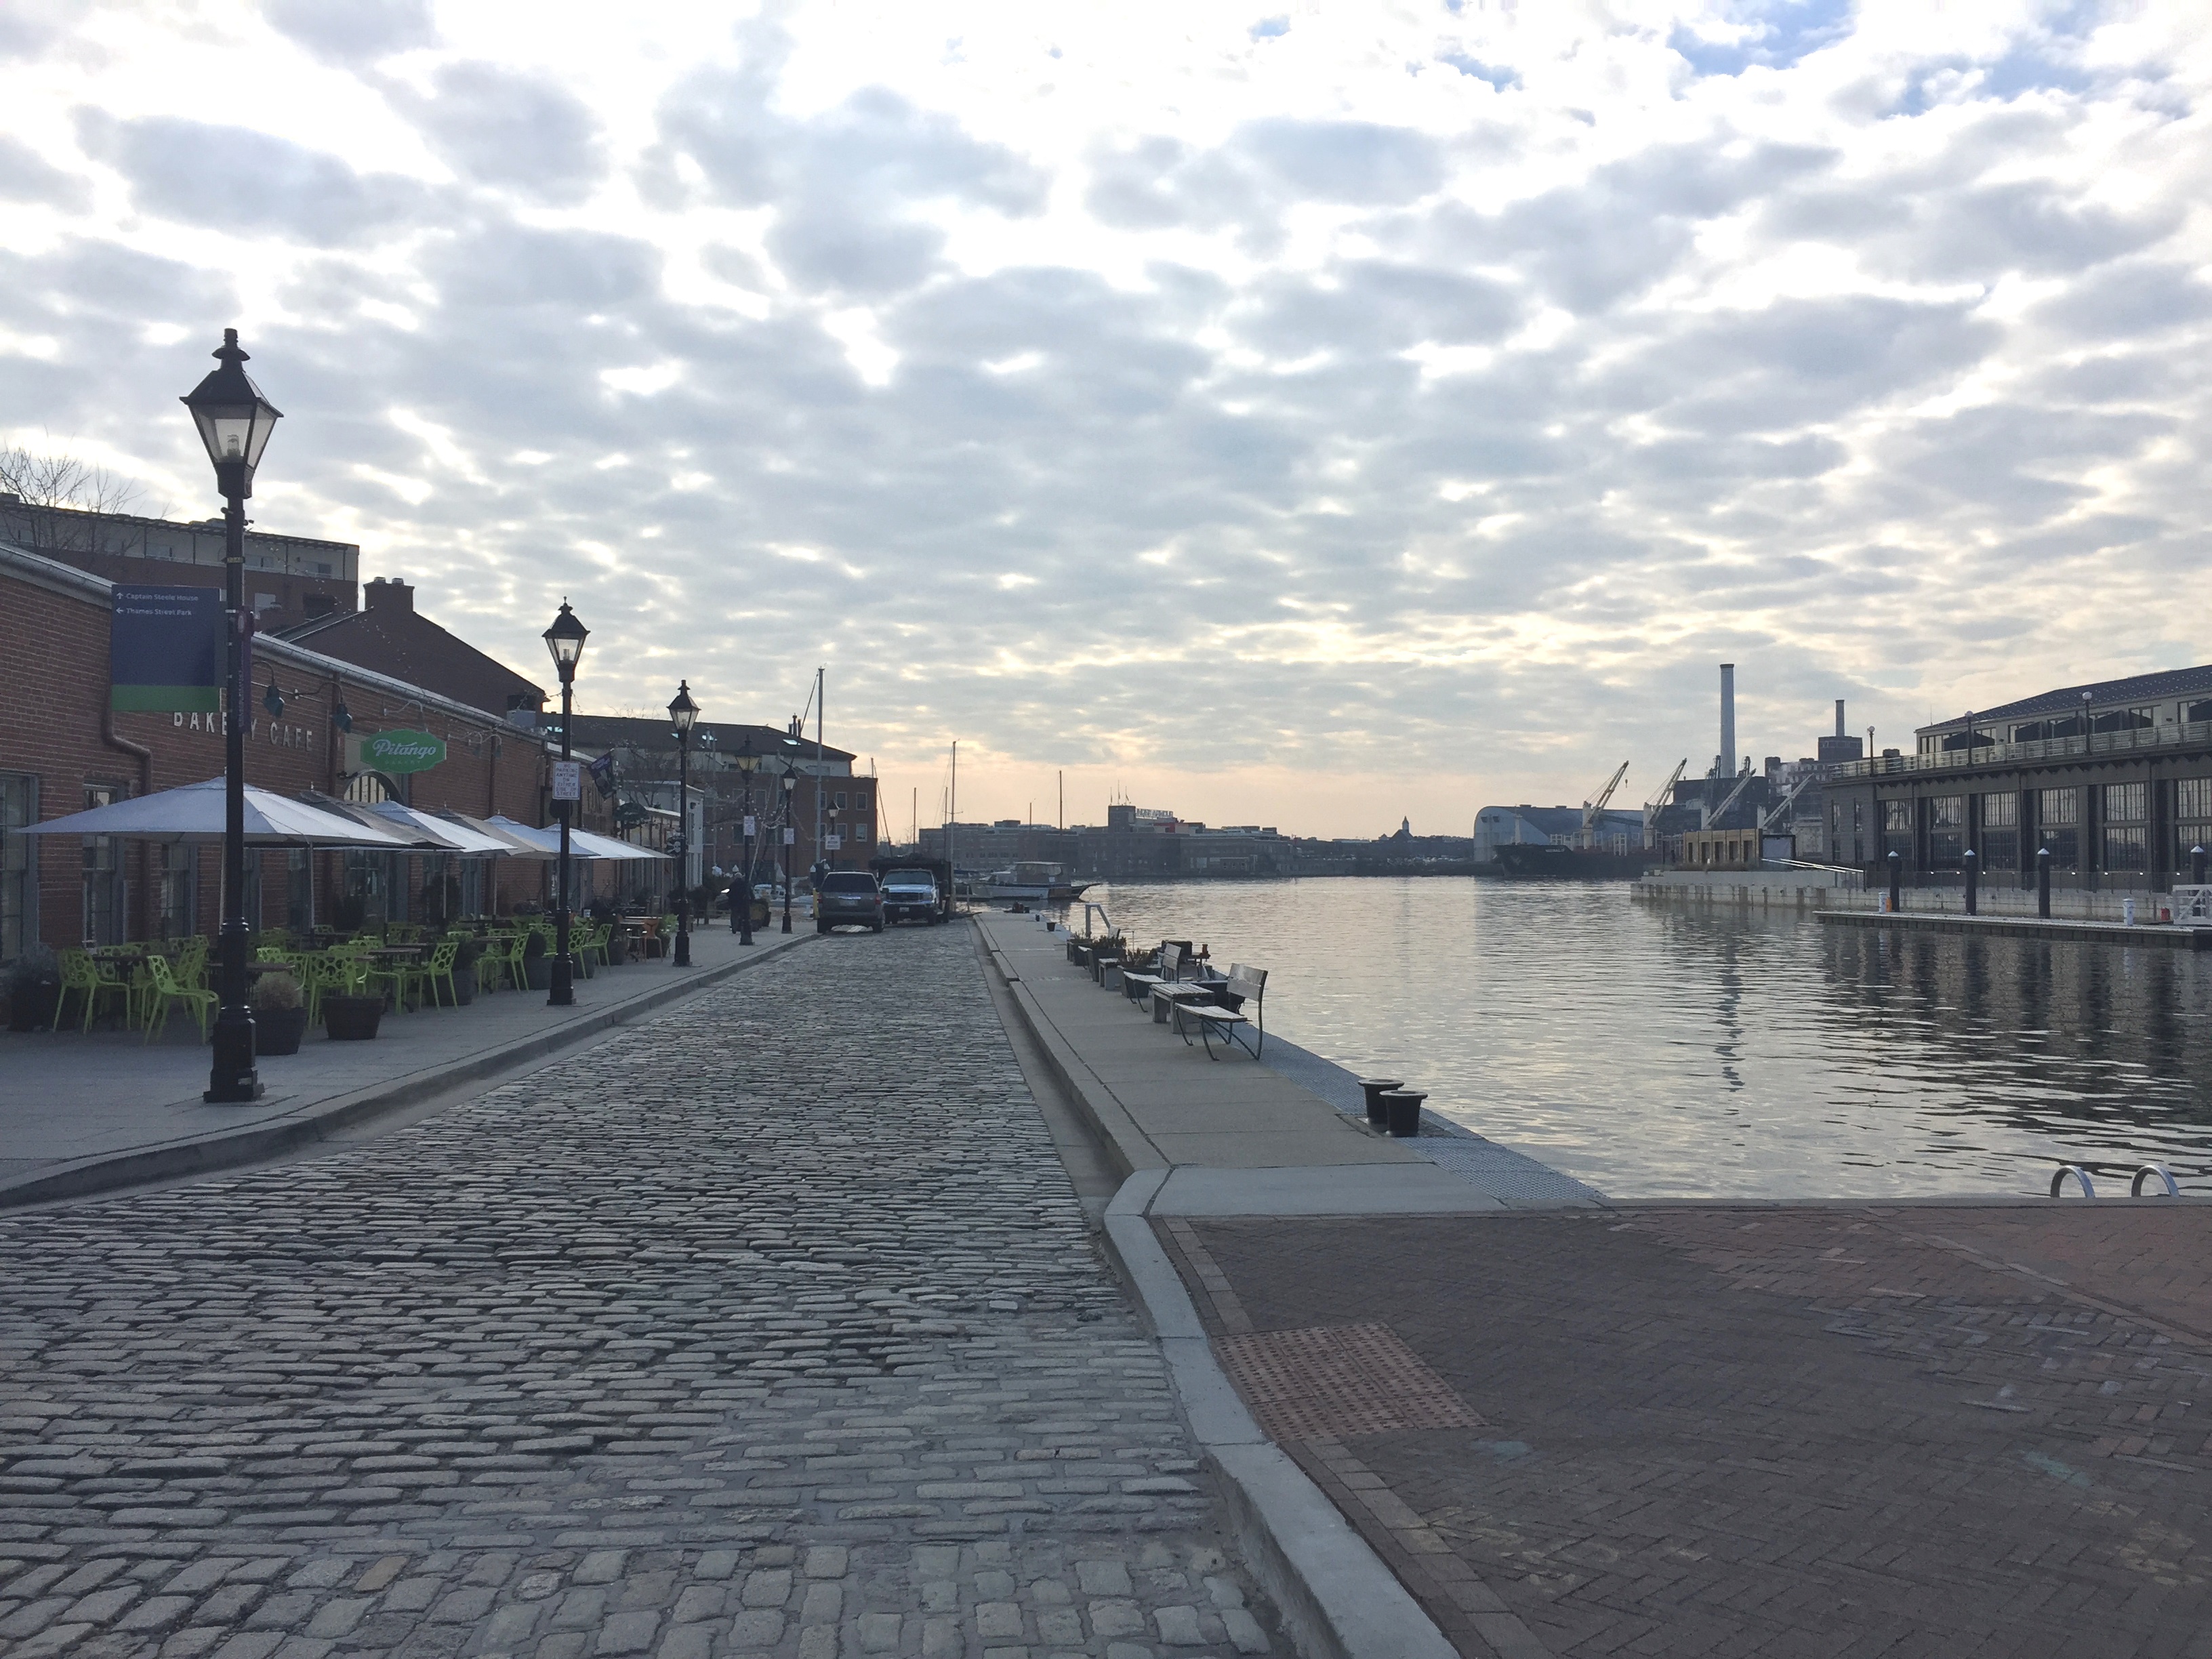 View of Pier at Fells Point